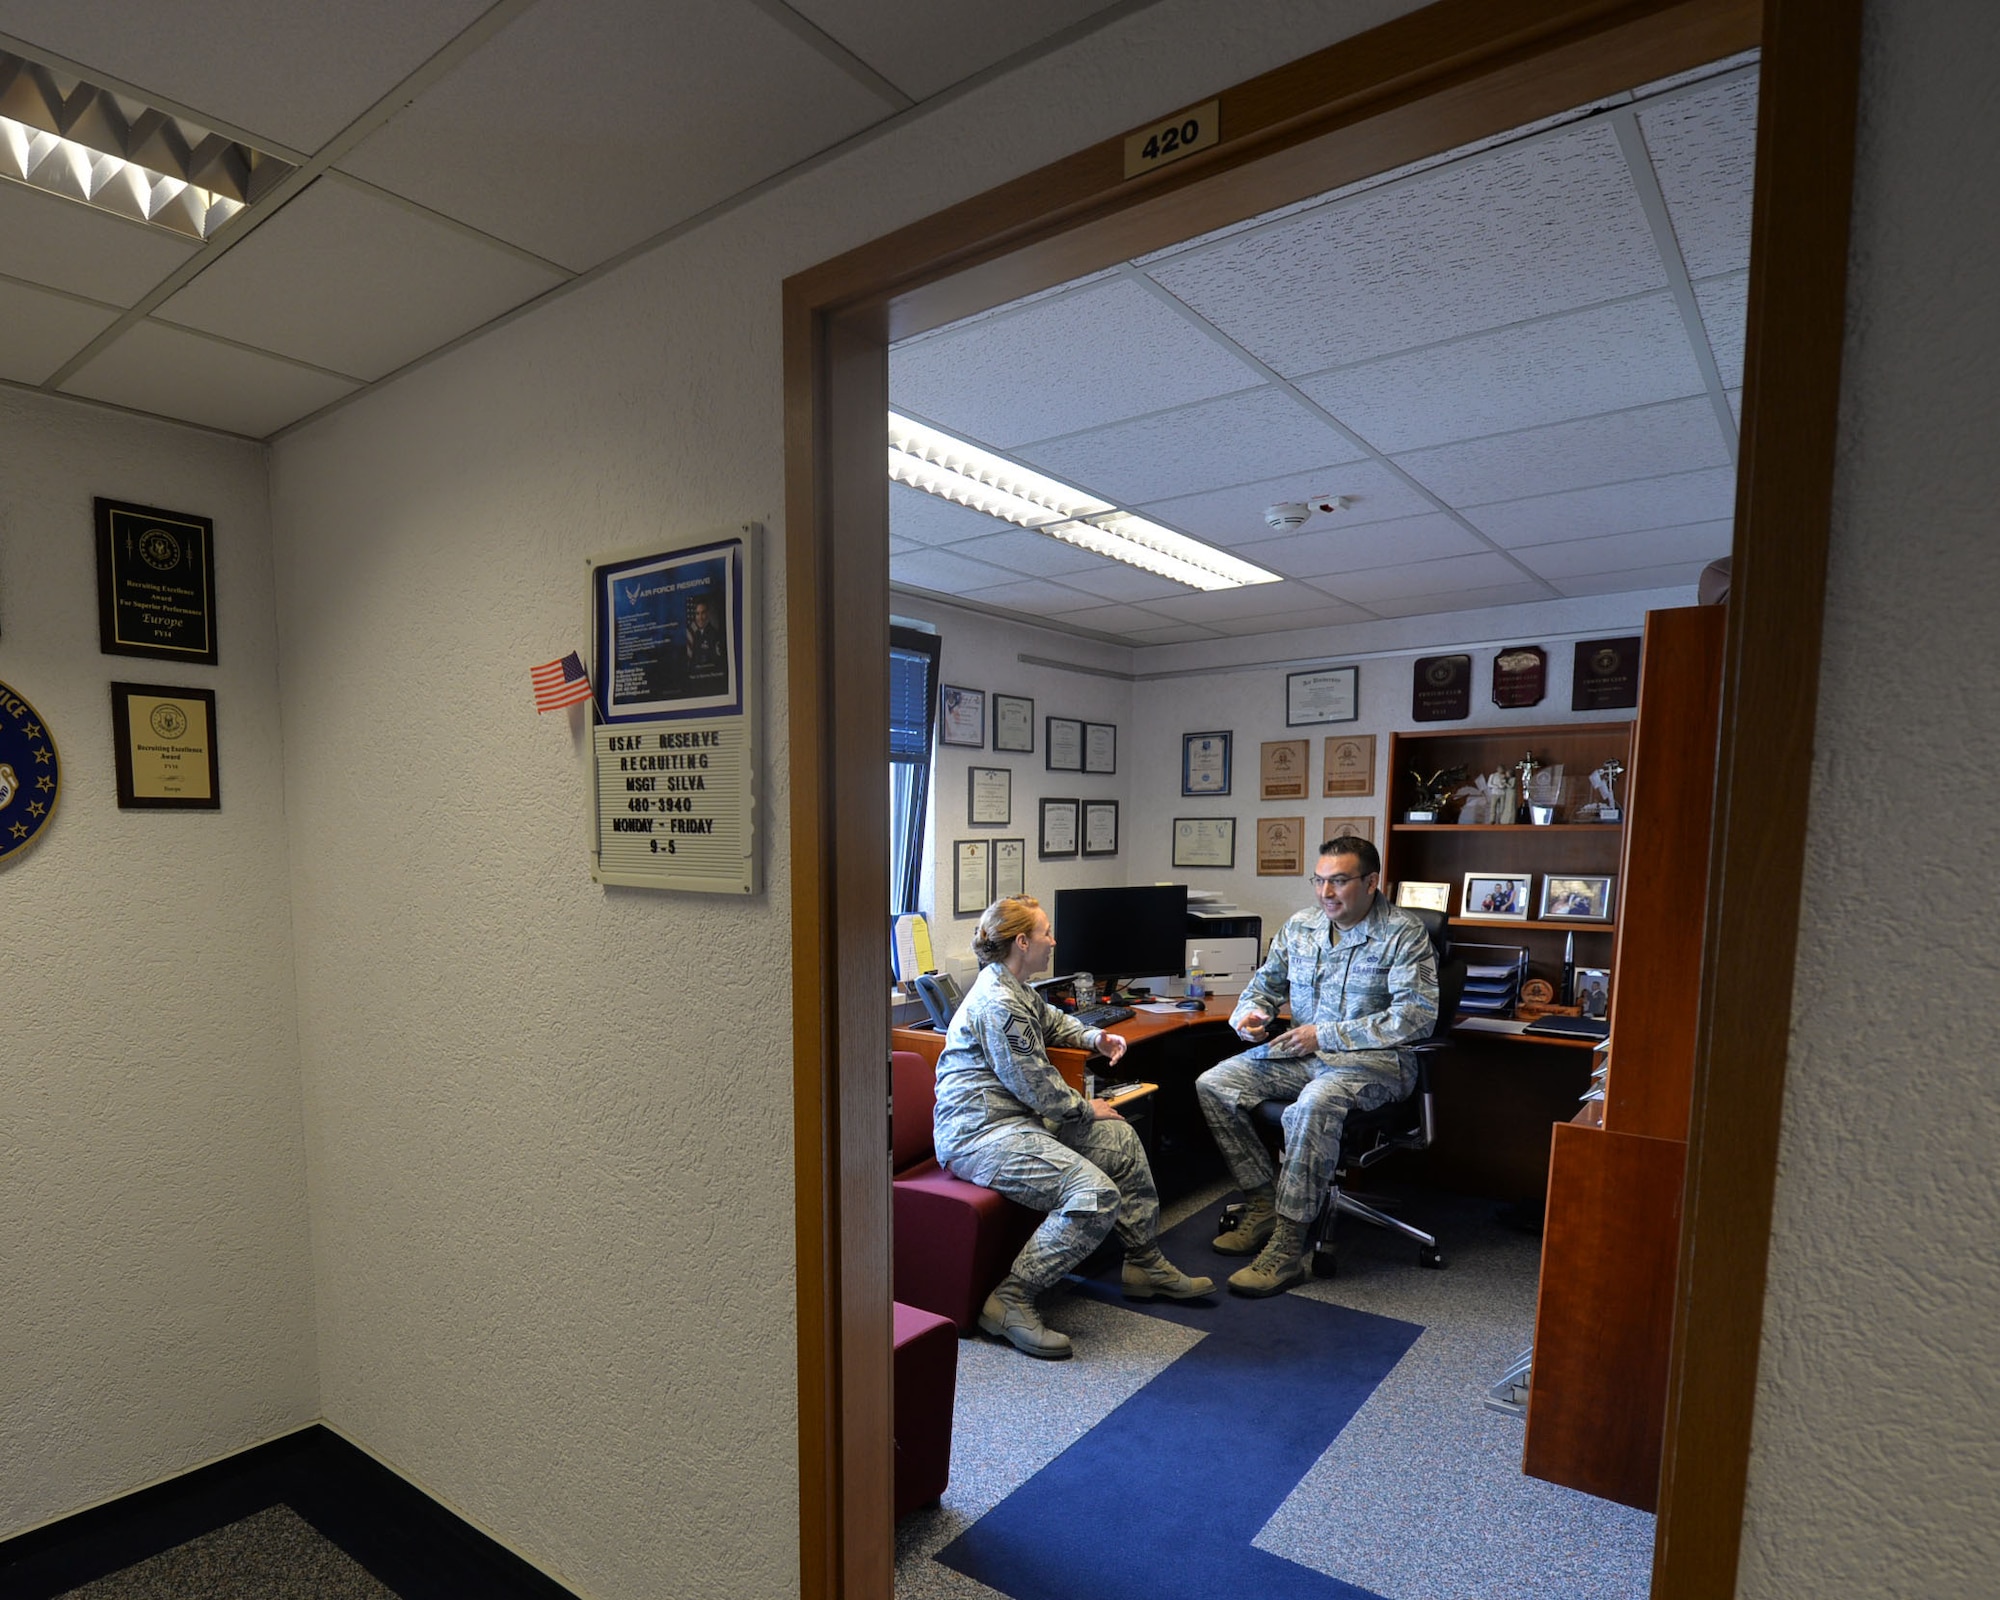 Ramstein’s Air Force Reserve Recruiting Team, Senior Master Sgt. Julie Boekers and Master Sgt. Gabriel Silva, discuss they day’s operations in their office on Ramstein Air Base, April 24, 2018. The Air Force Reserve offers currently serving, Active-Duty Airmen (enlisted and officer) the opportunity to transfer into the Reserve via two programs – Palace Front and Palace Chase. (U.S. Air Force photo by Staff Sgt. Tory Patterson)